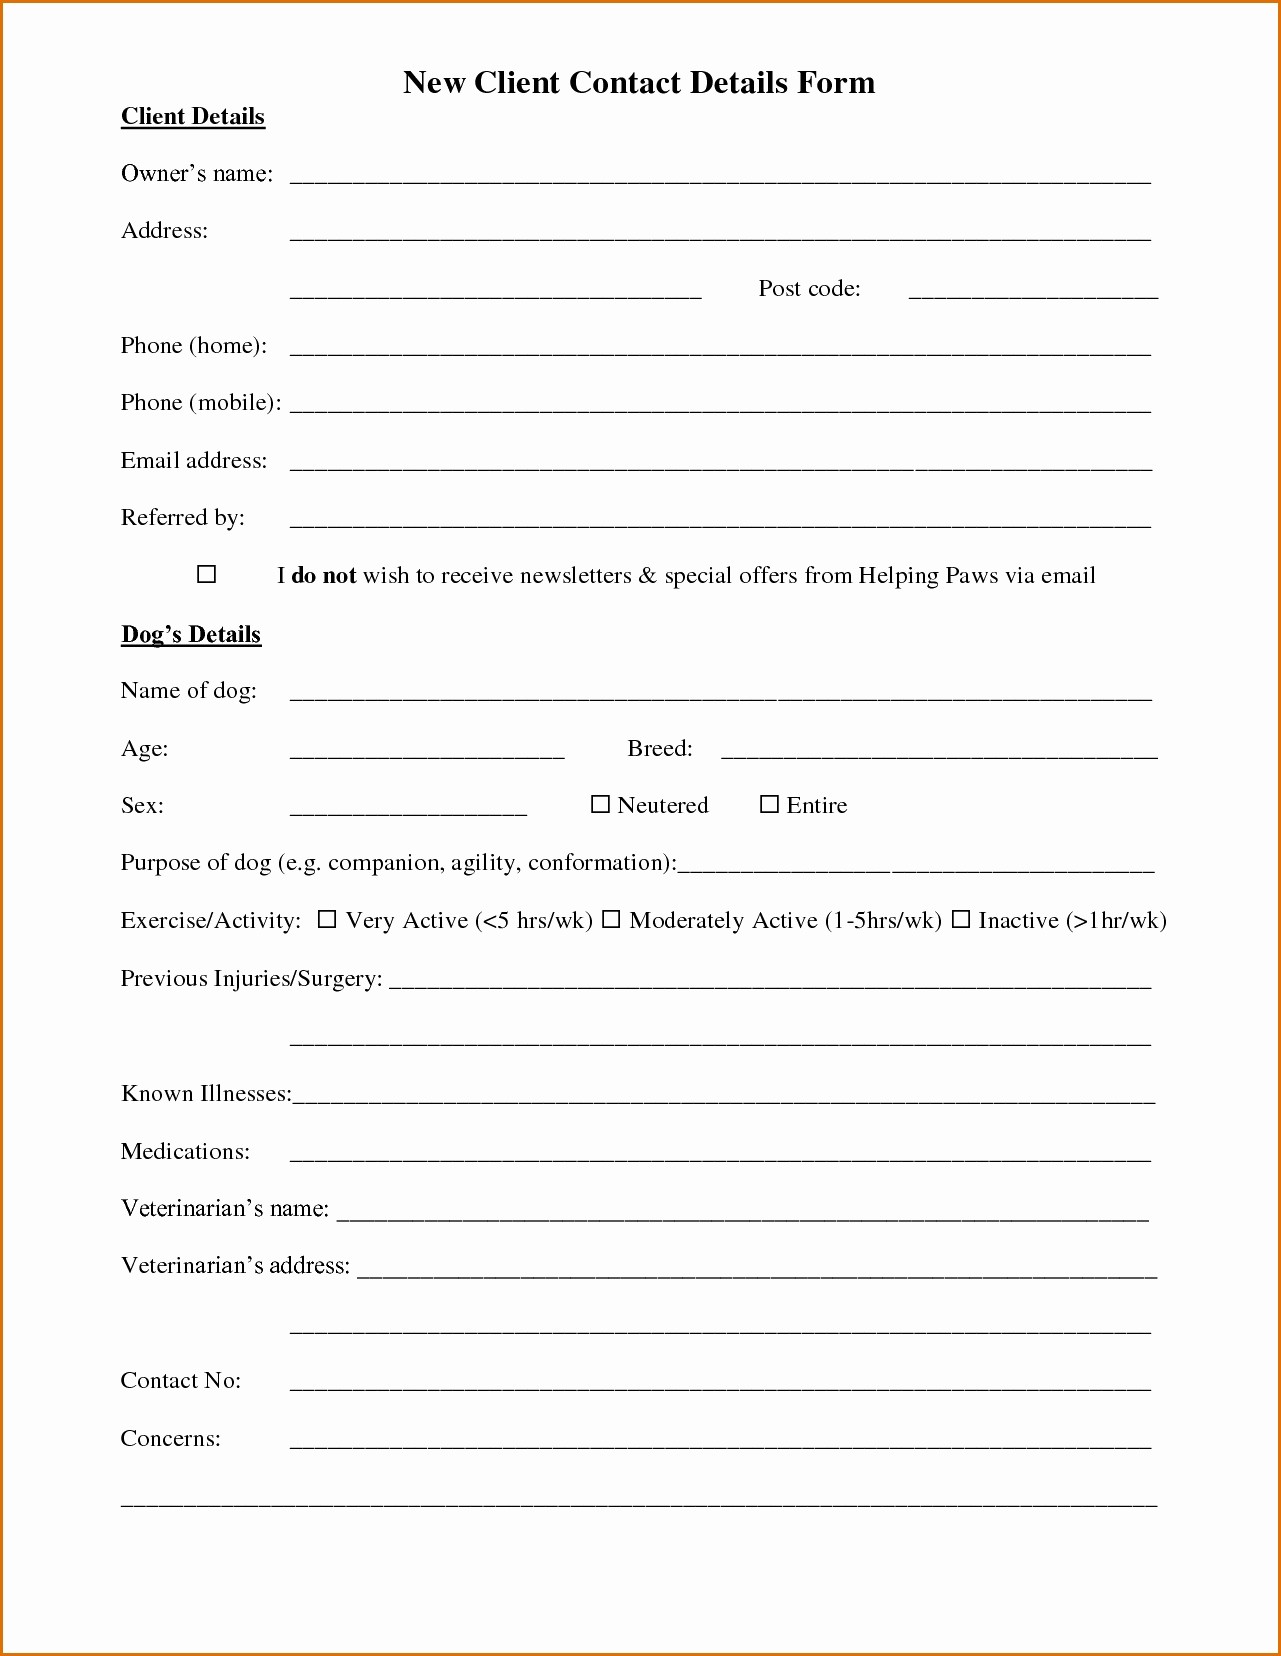 Cold Call Sheet Template New Client Log Joselinohouse Document